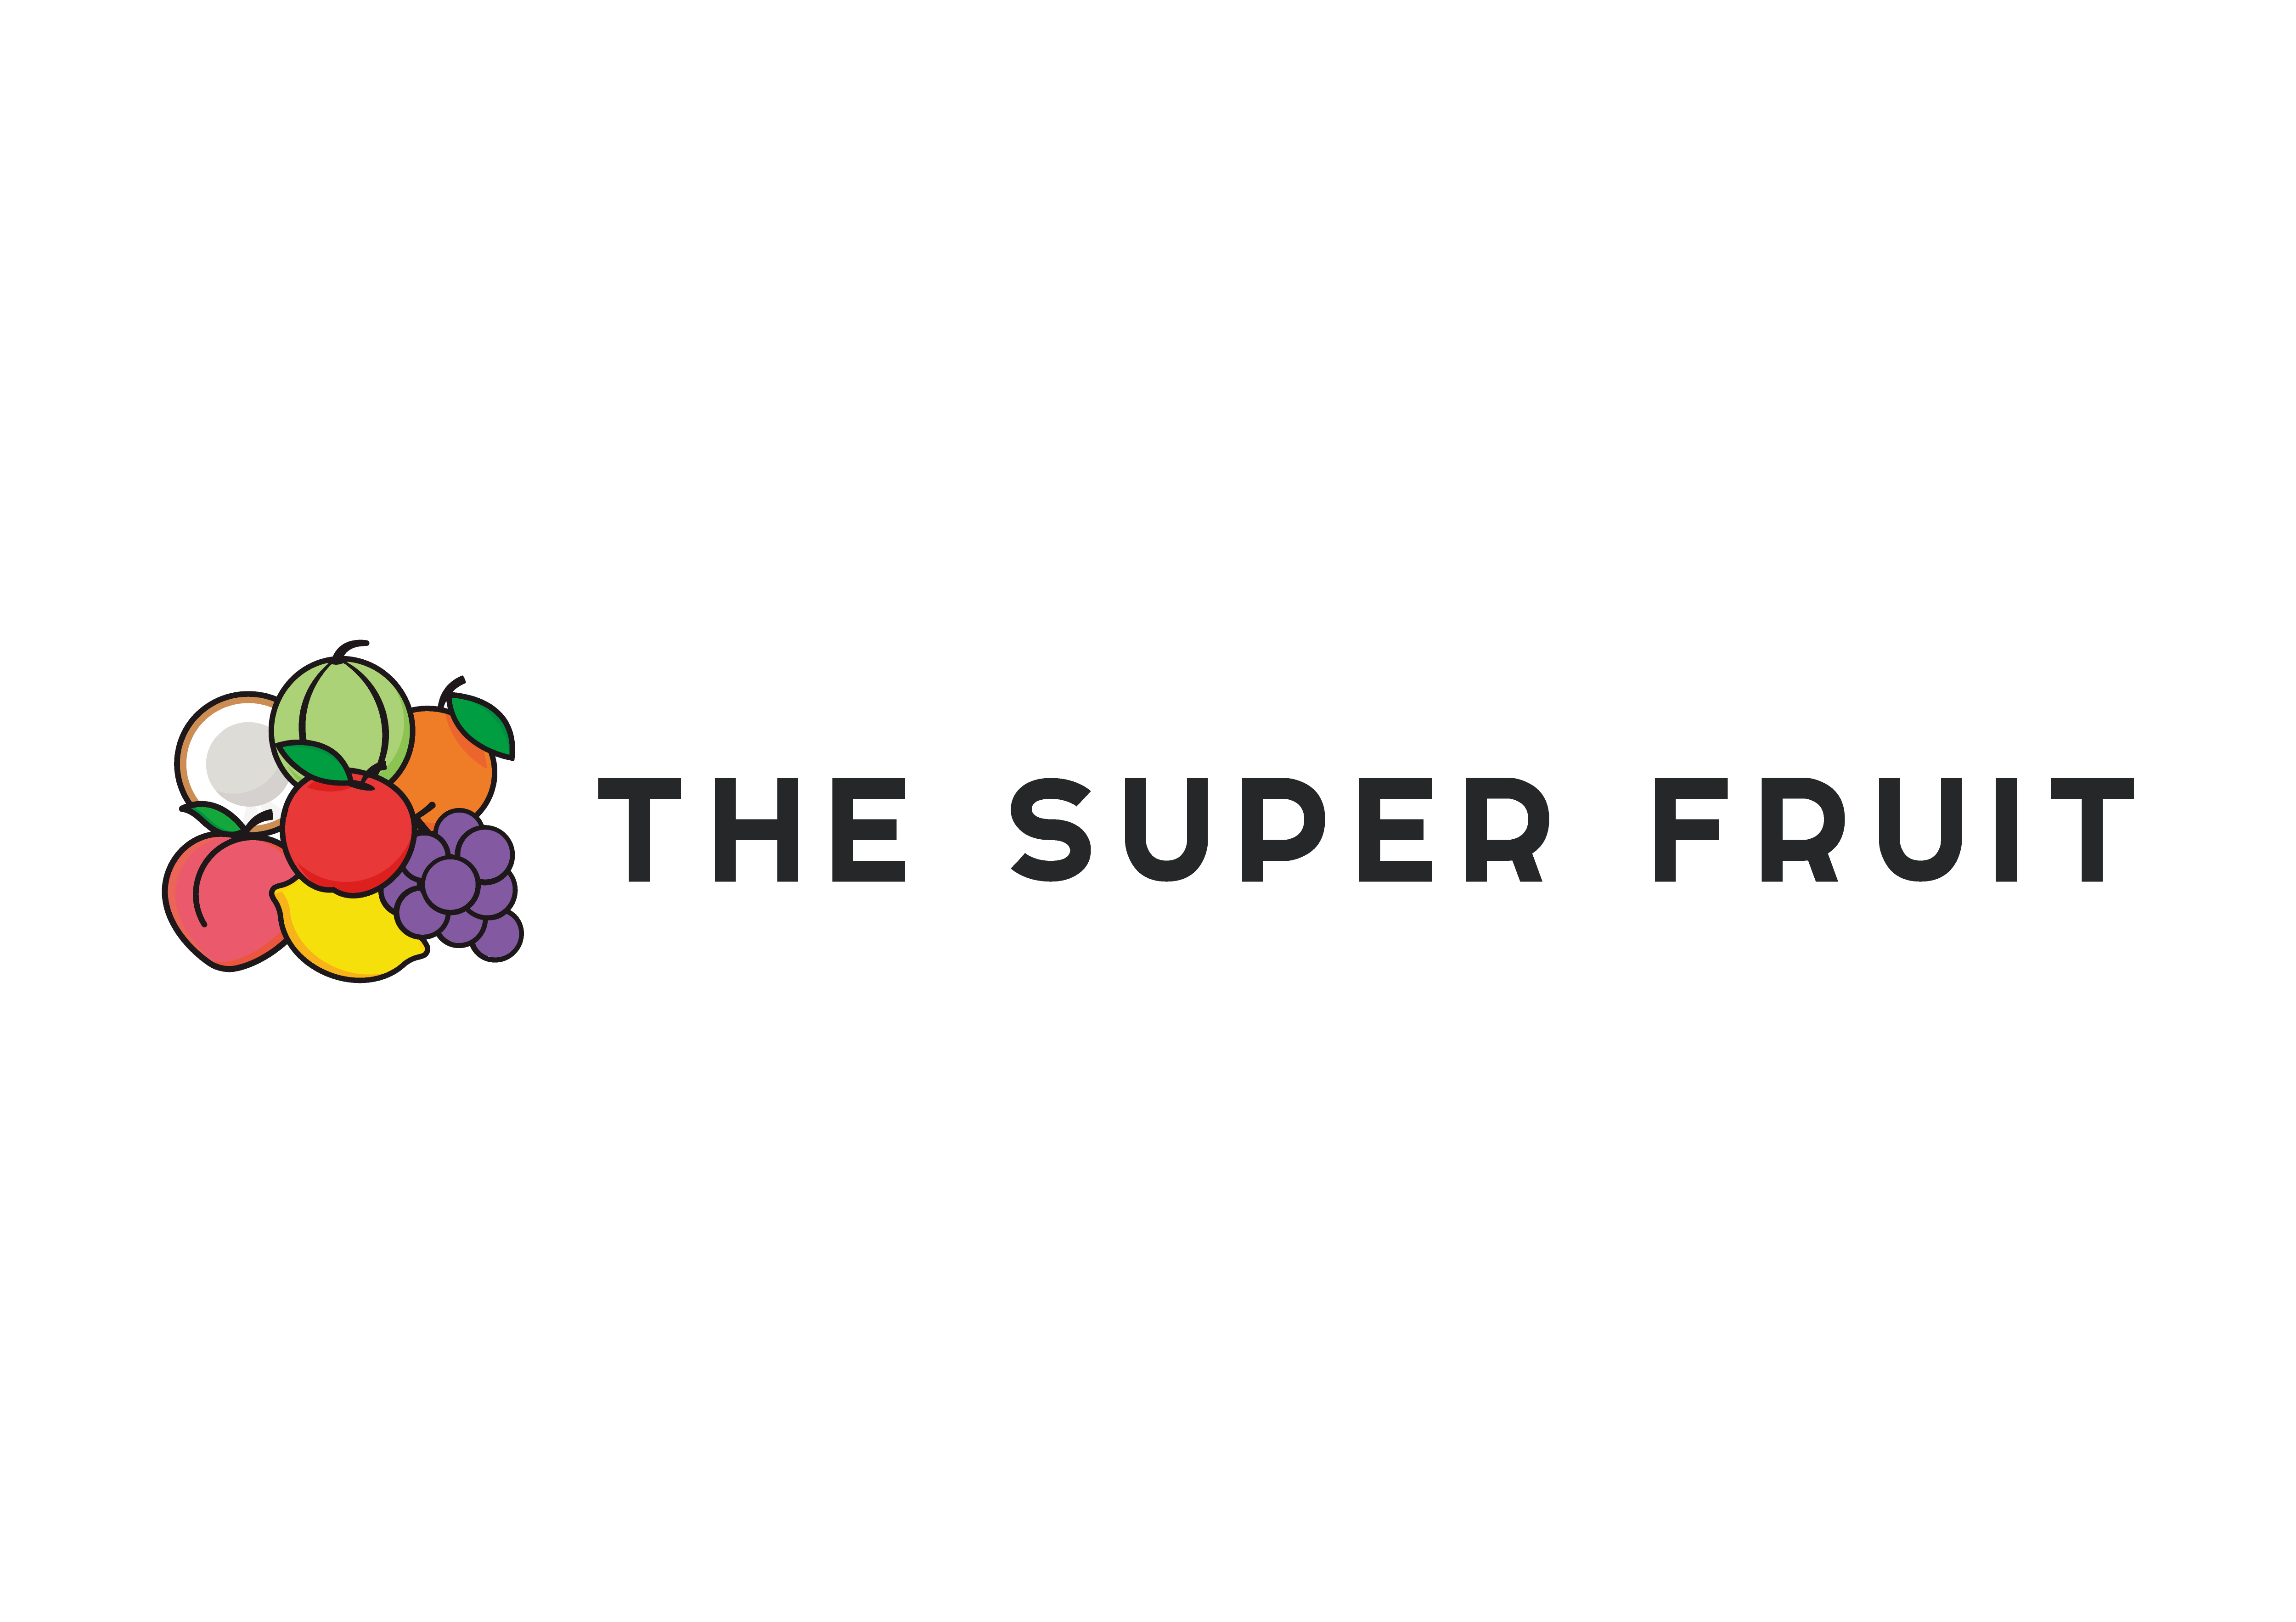 【NEWS】10/8(土)開催「THE SUPER FRUIT × 世が世なら!!! 学園祭ツアー2022」城西大学(東京紀尾井町キャンパス)の事前応募詳細を発表！